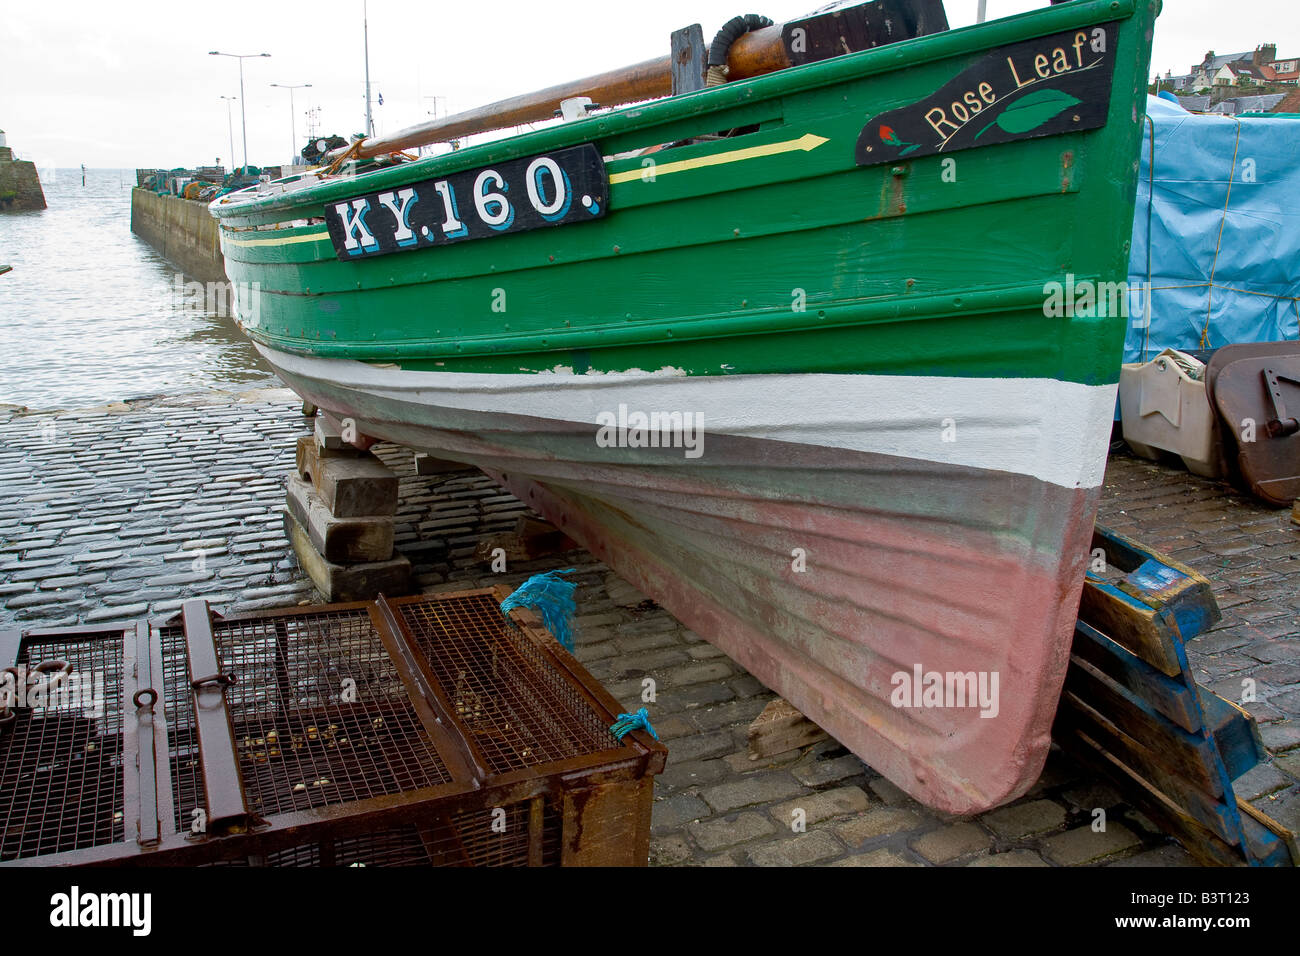 A small fishing boat on the side of a Scottish harbour Stock Photo